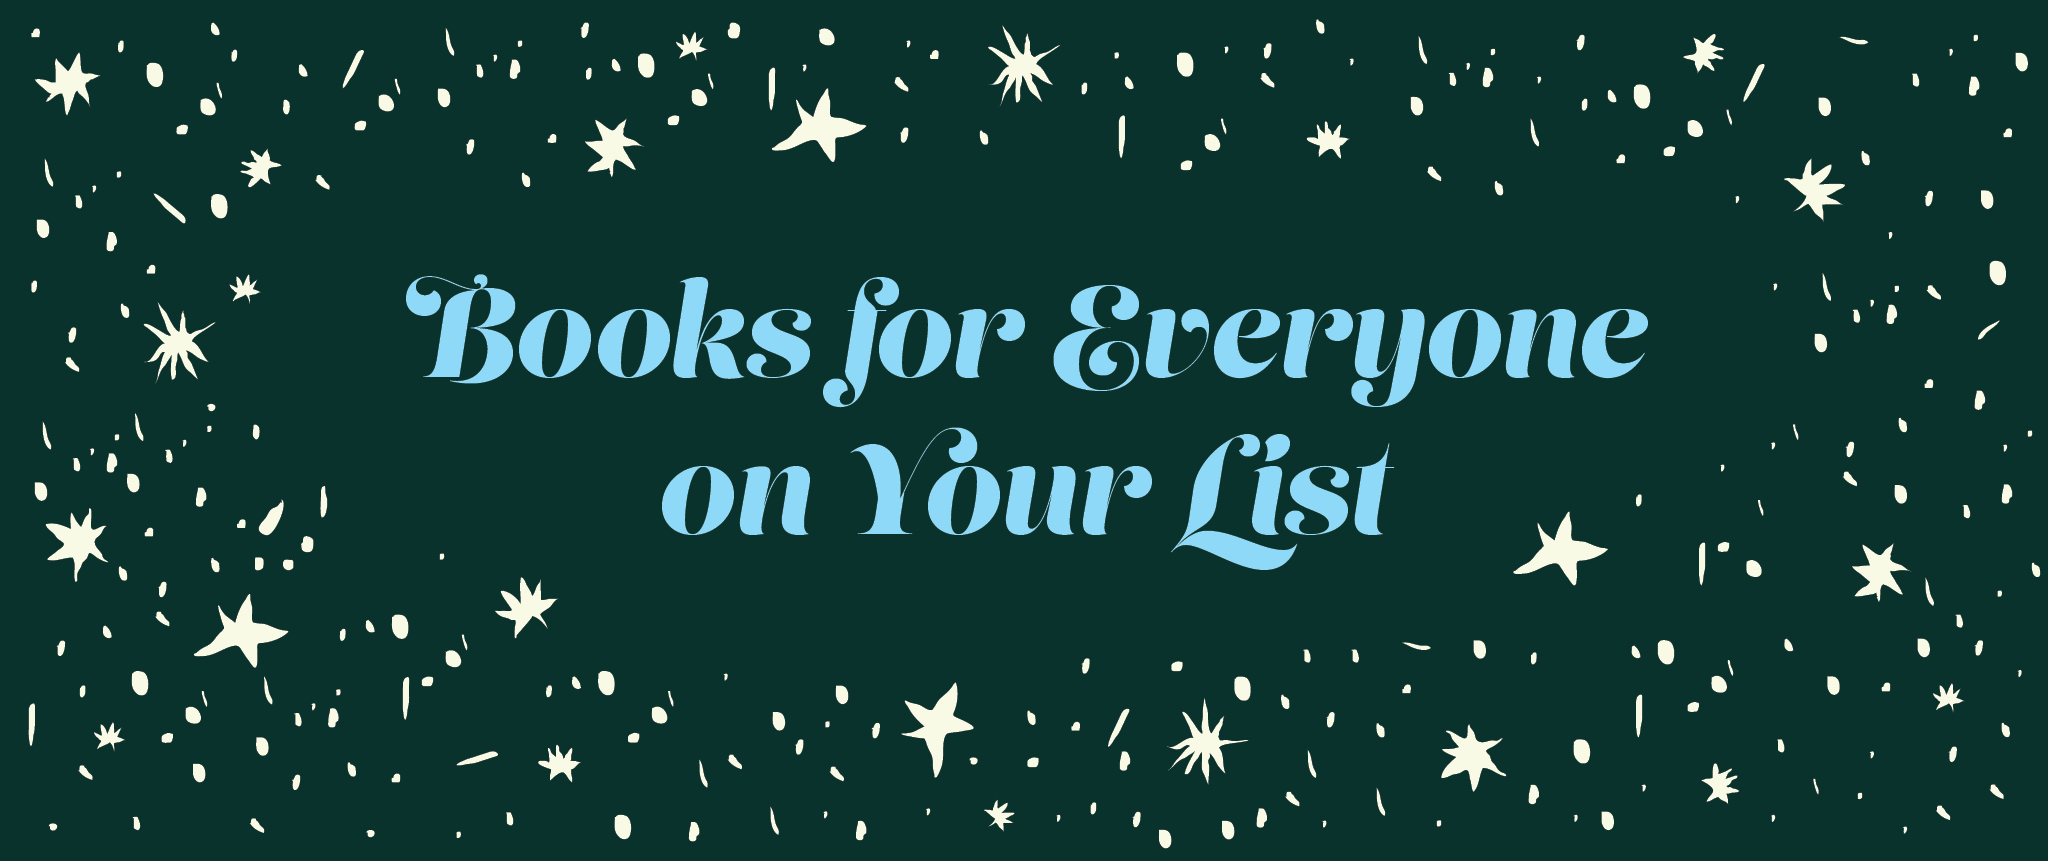 Our Not-So-Serious Gift Guide of Useful Presents: Your Holiday Gift-Giving  Shortlist - The Mom Edit